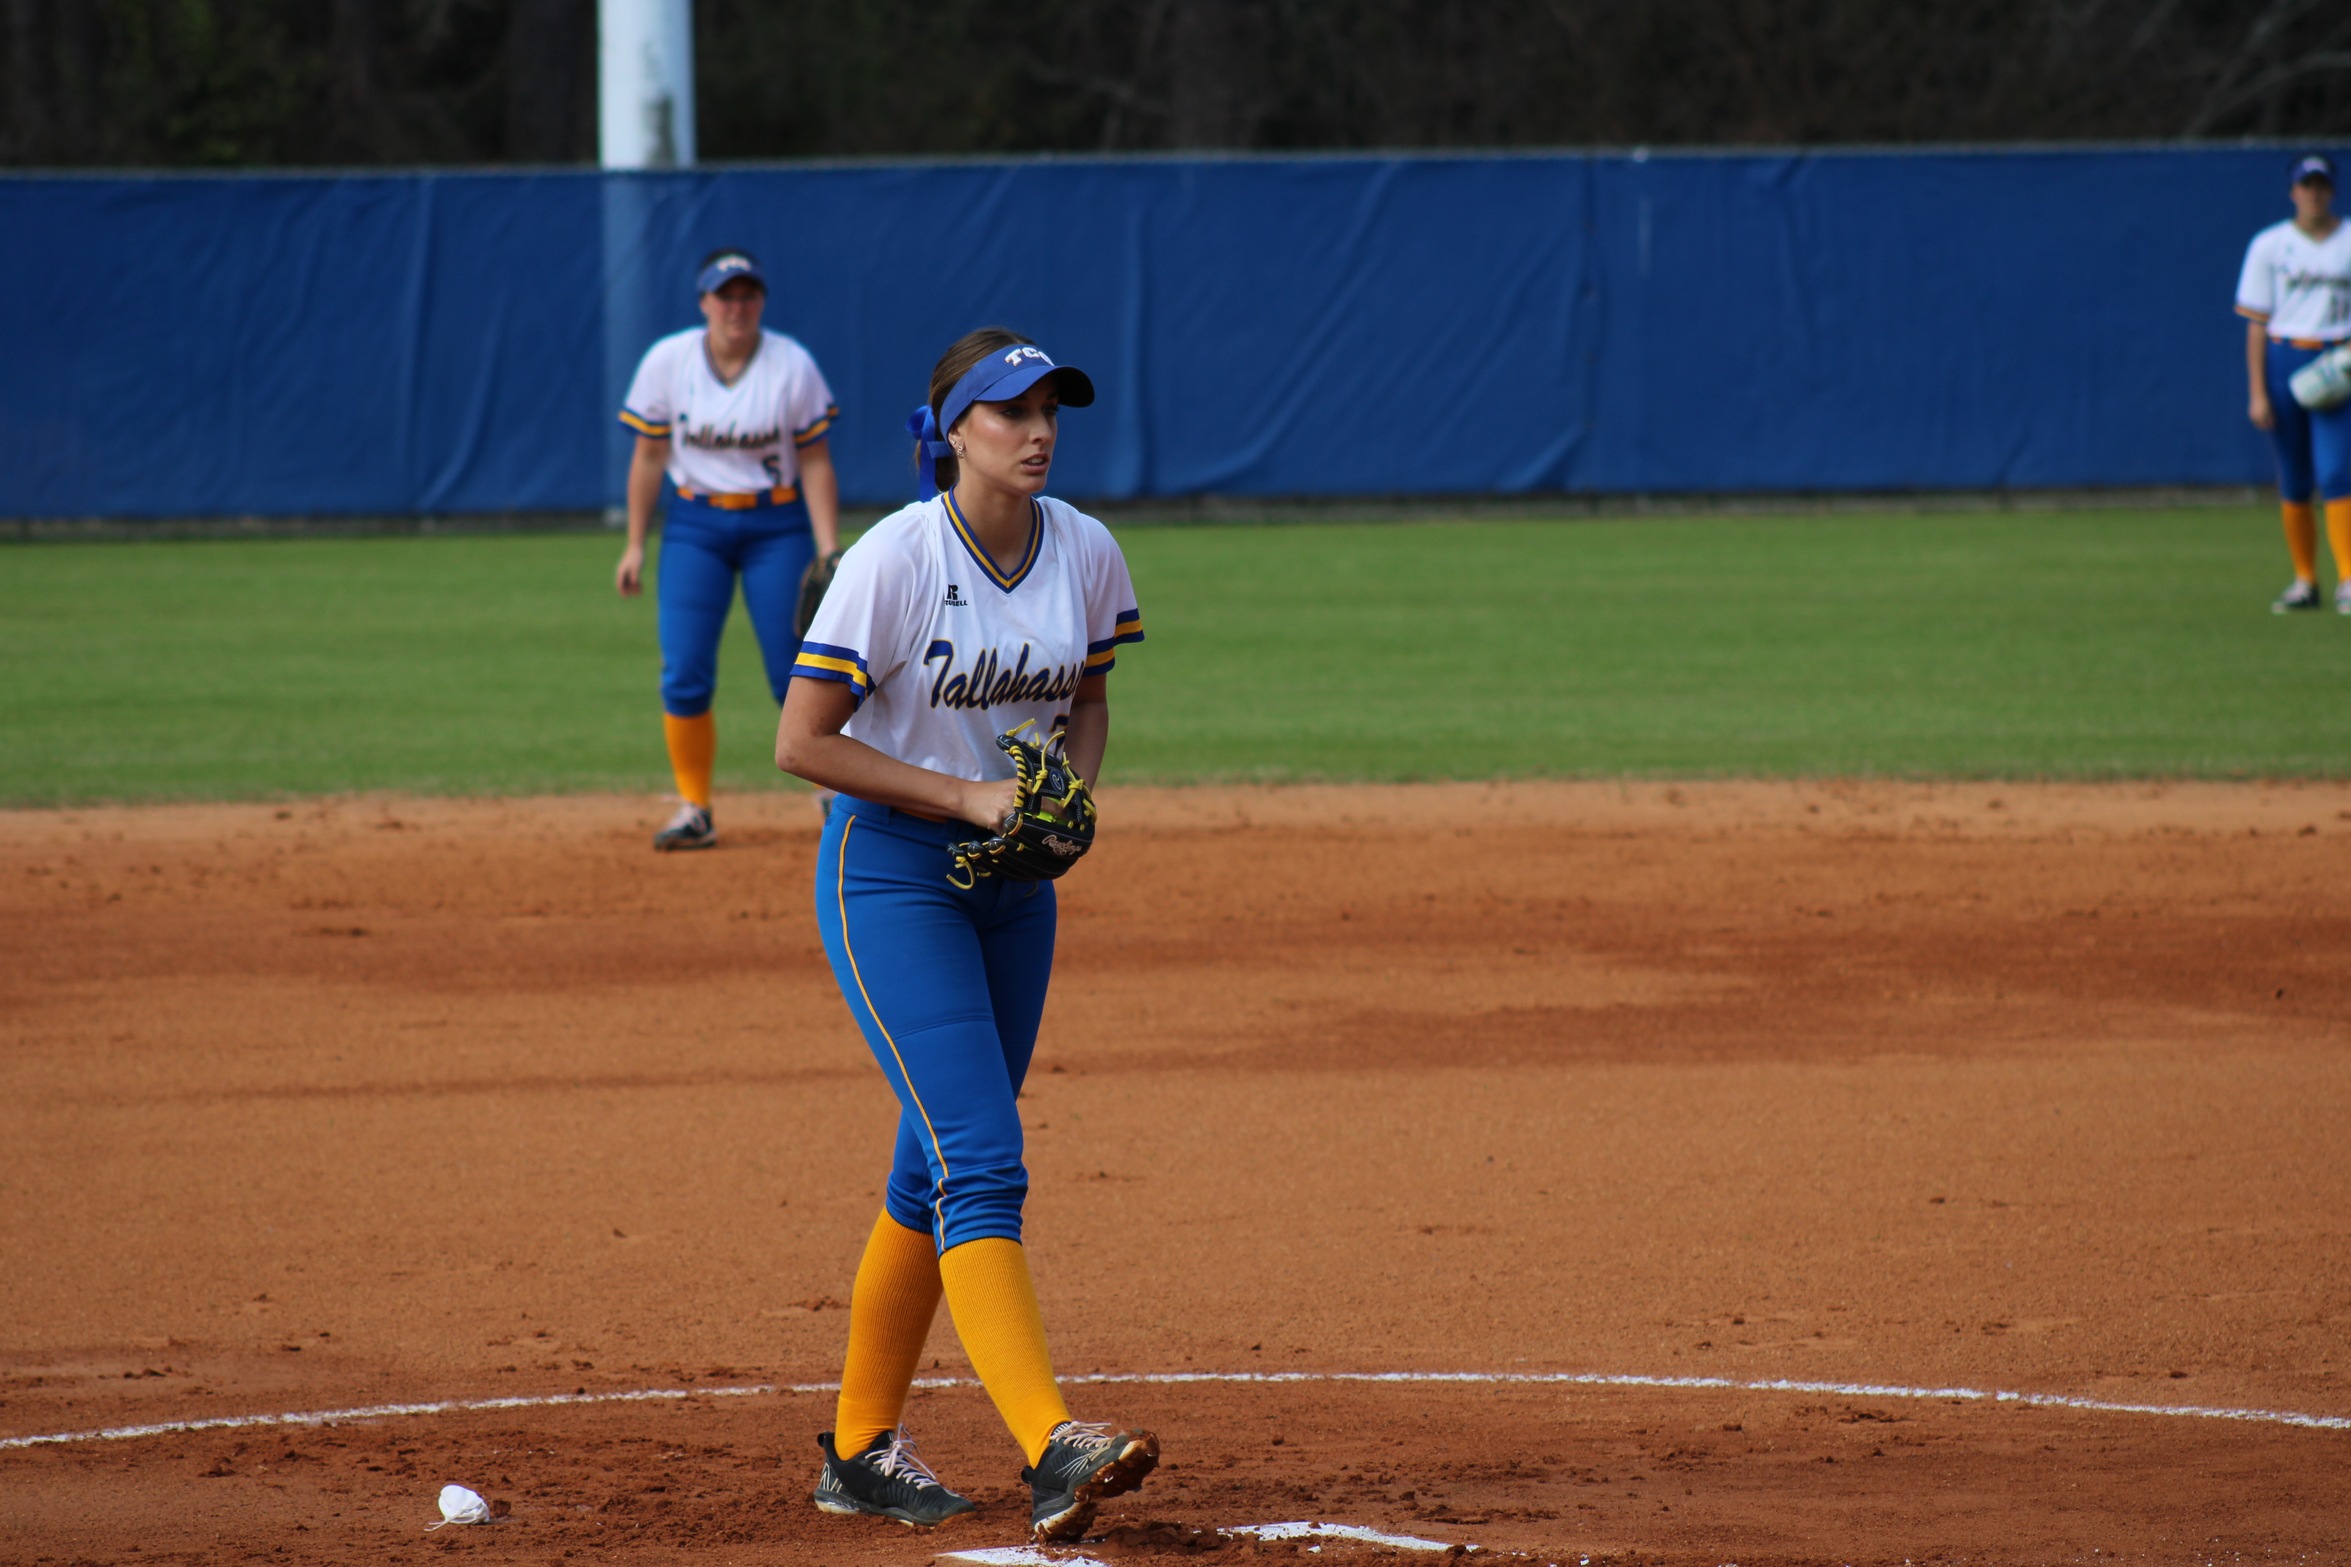 Brittany Michael named Region 8 Pitcher of the Week